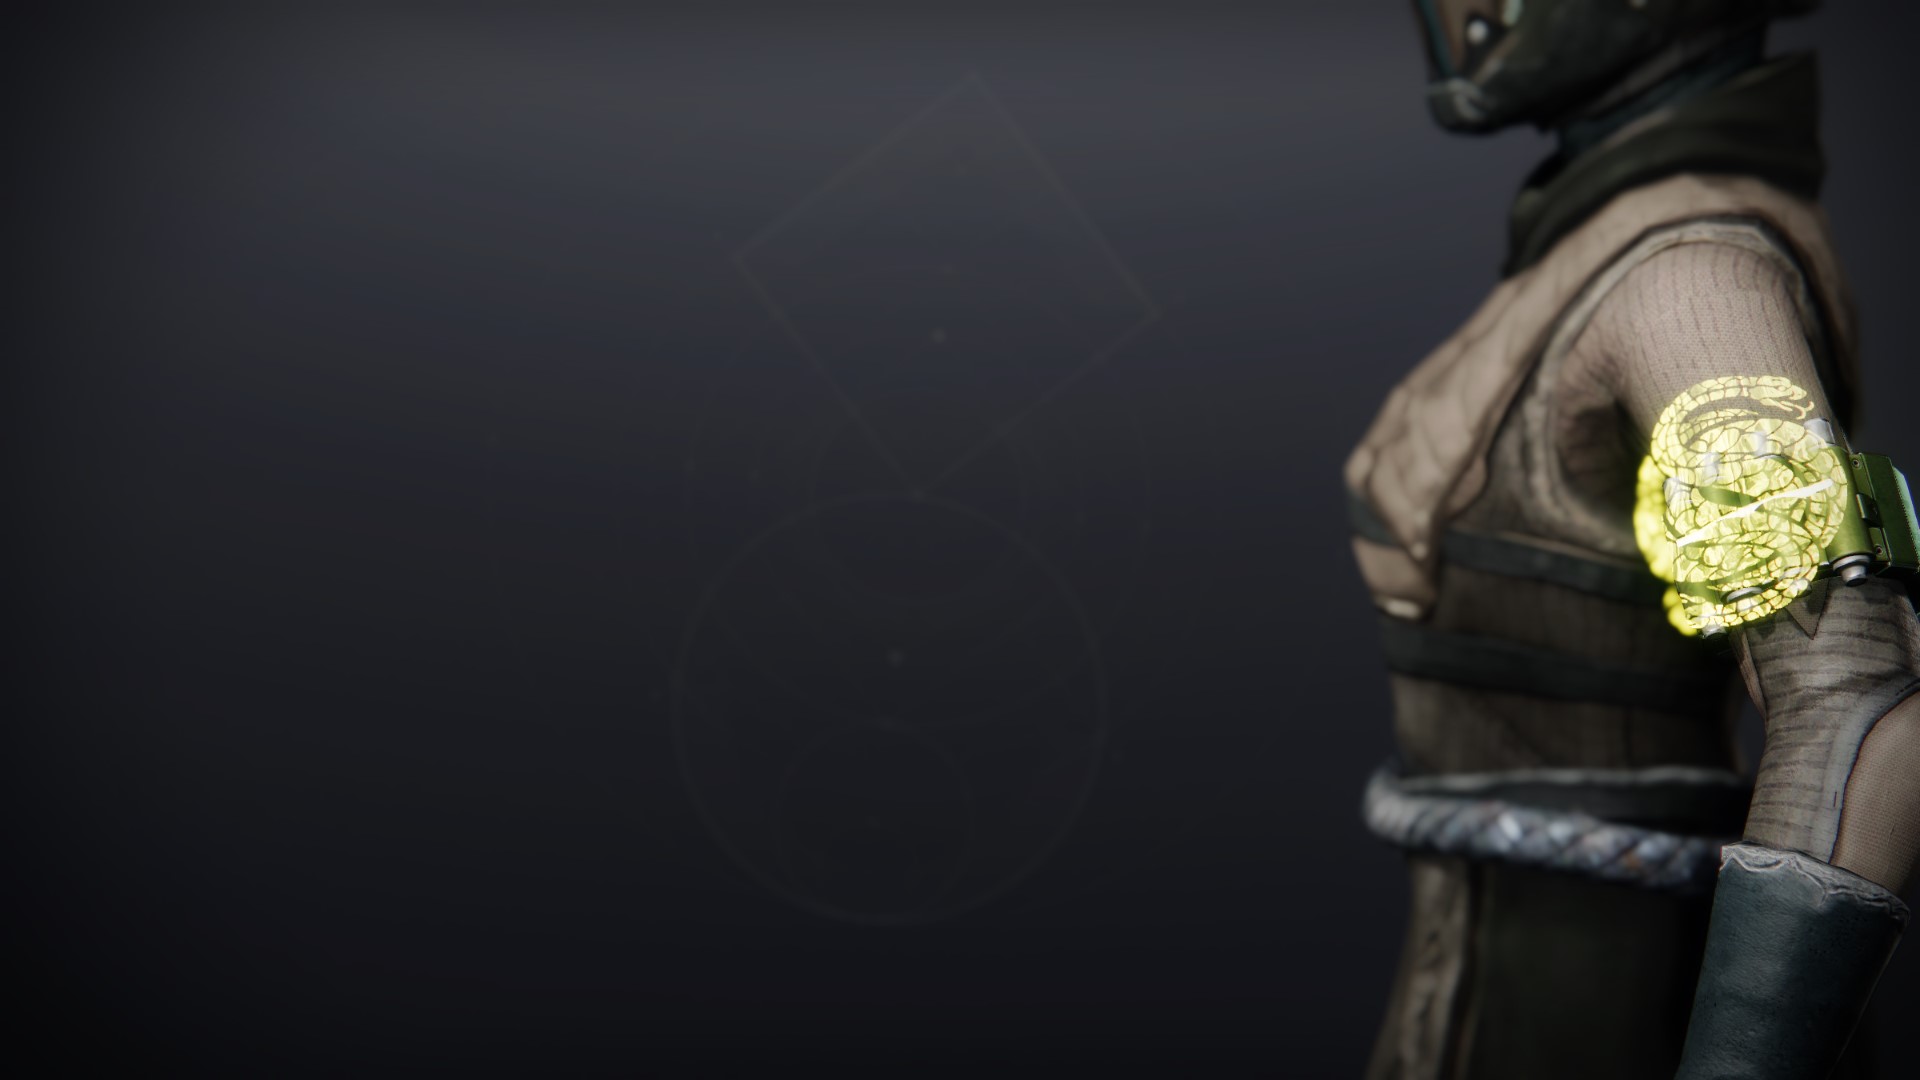 An in-game render of the Illicit Sentry Bond.